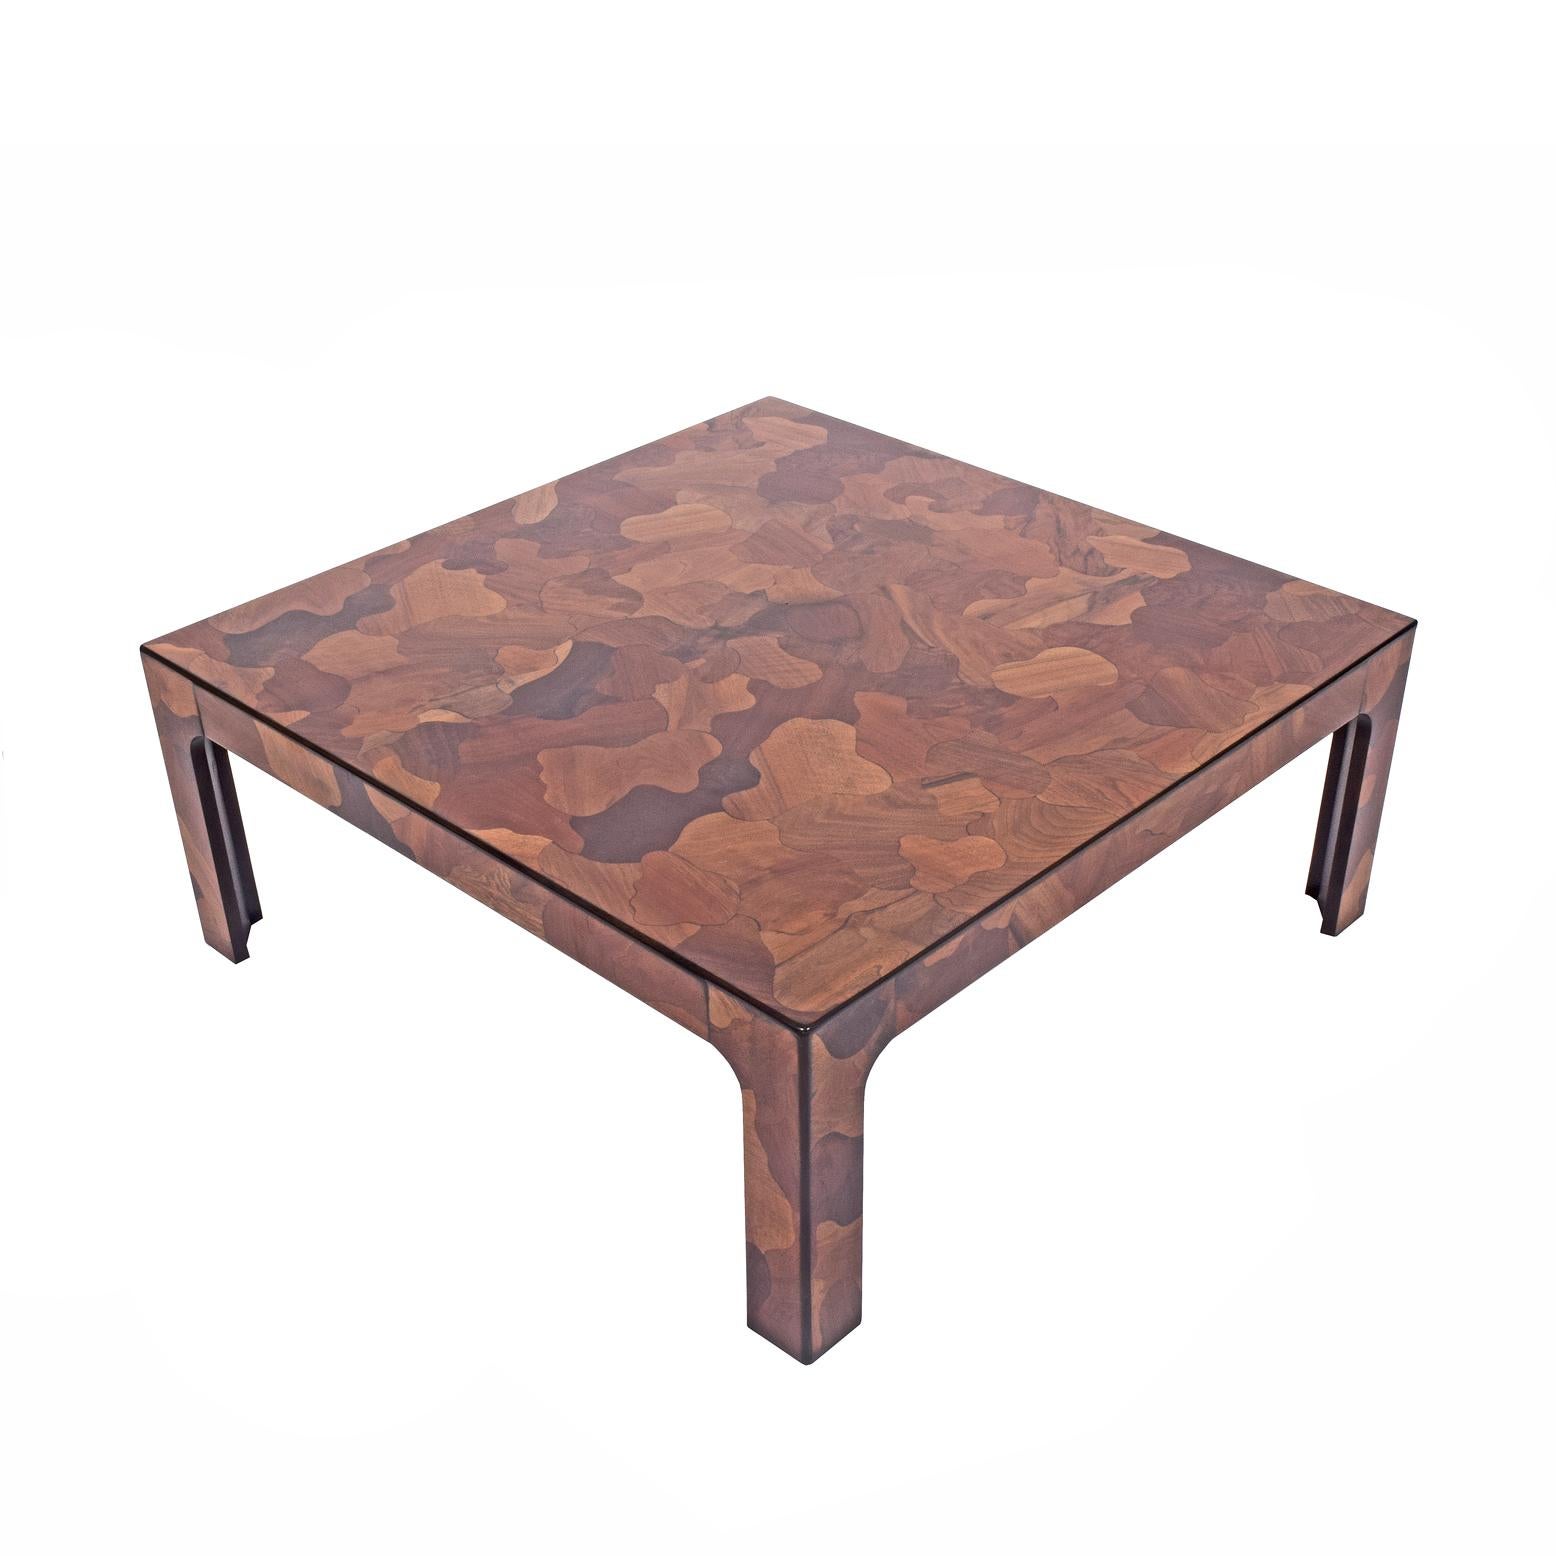 Very nice quality square coffee table  patchwork inlay of different wood sources.